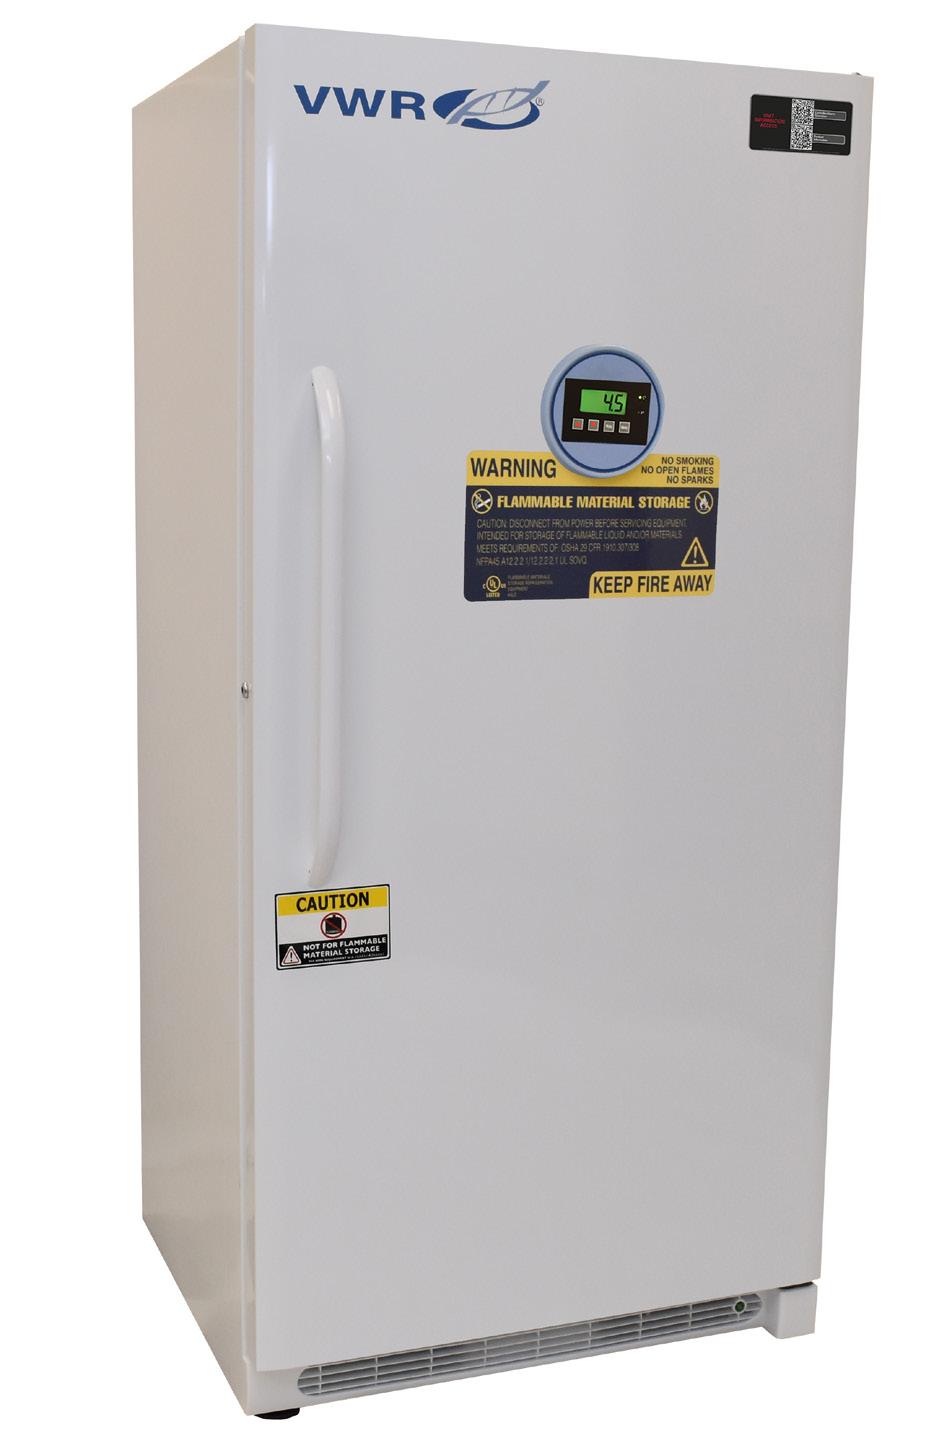 VWR Series Flammable Refrigerators & Freezers 1-10 C [Refrigerator] -15 - -25 C [Freezer] Adjustable Operating Temp Range No Internal Electrical Components Inside of Unit.